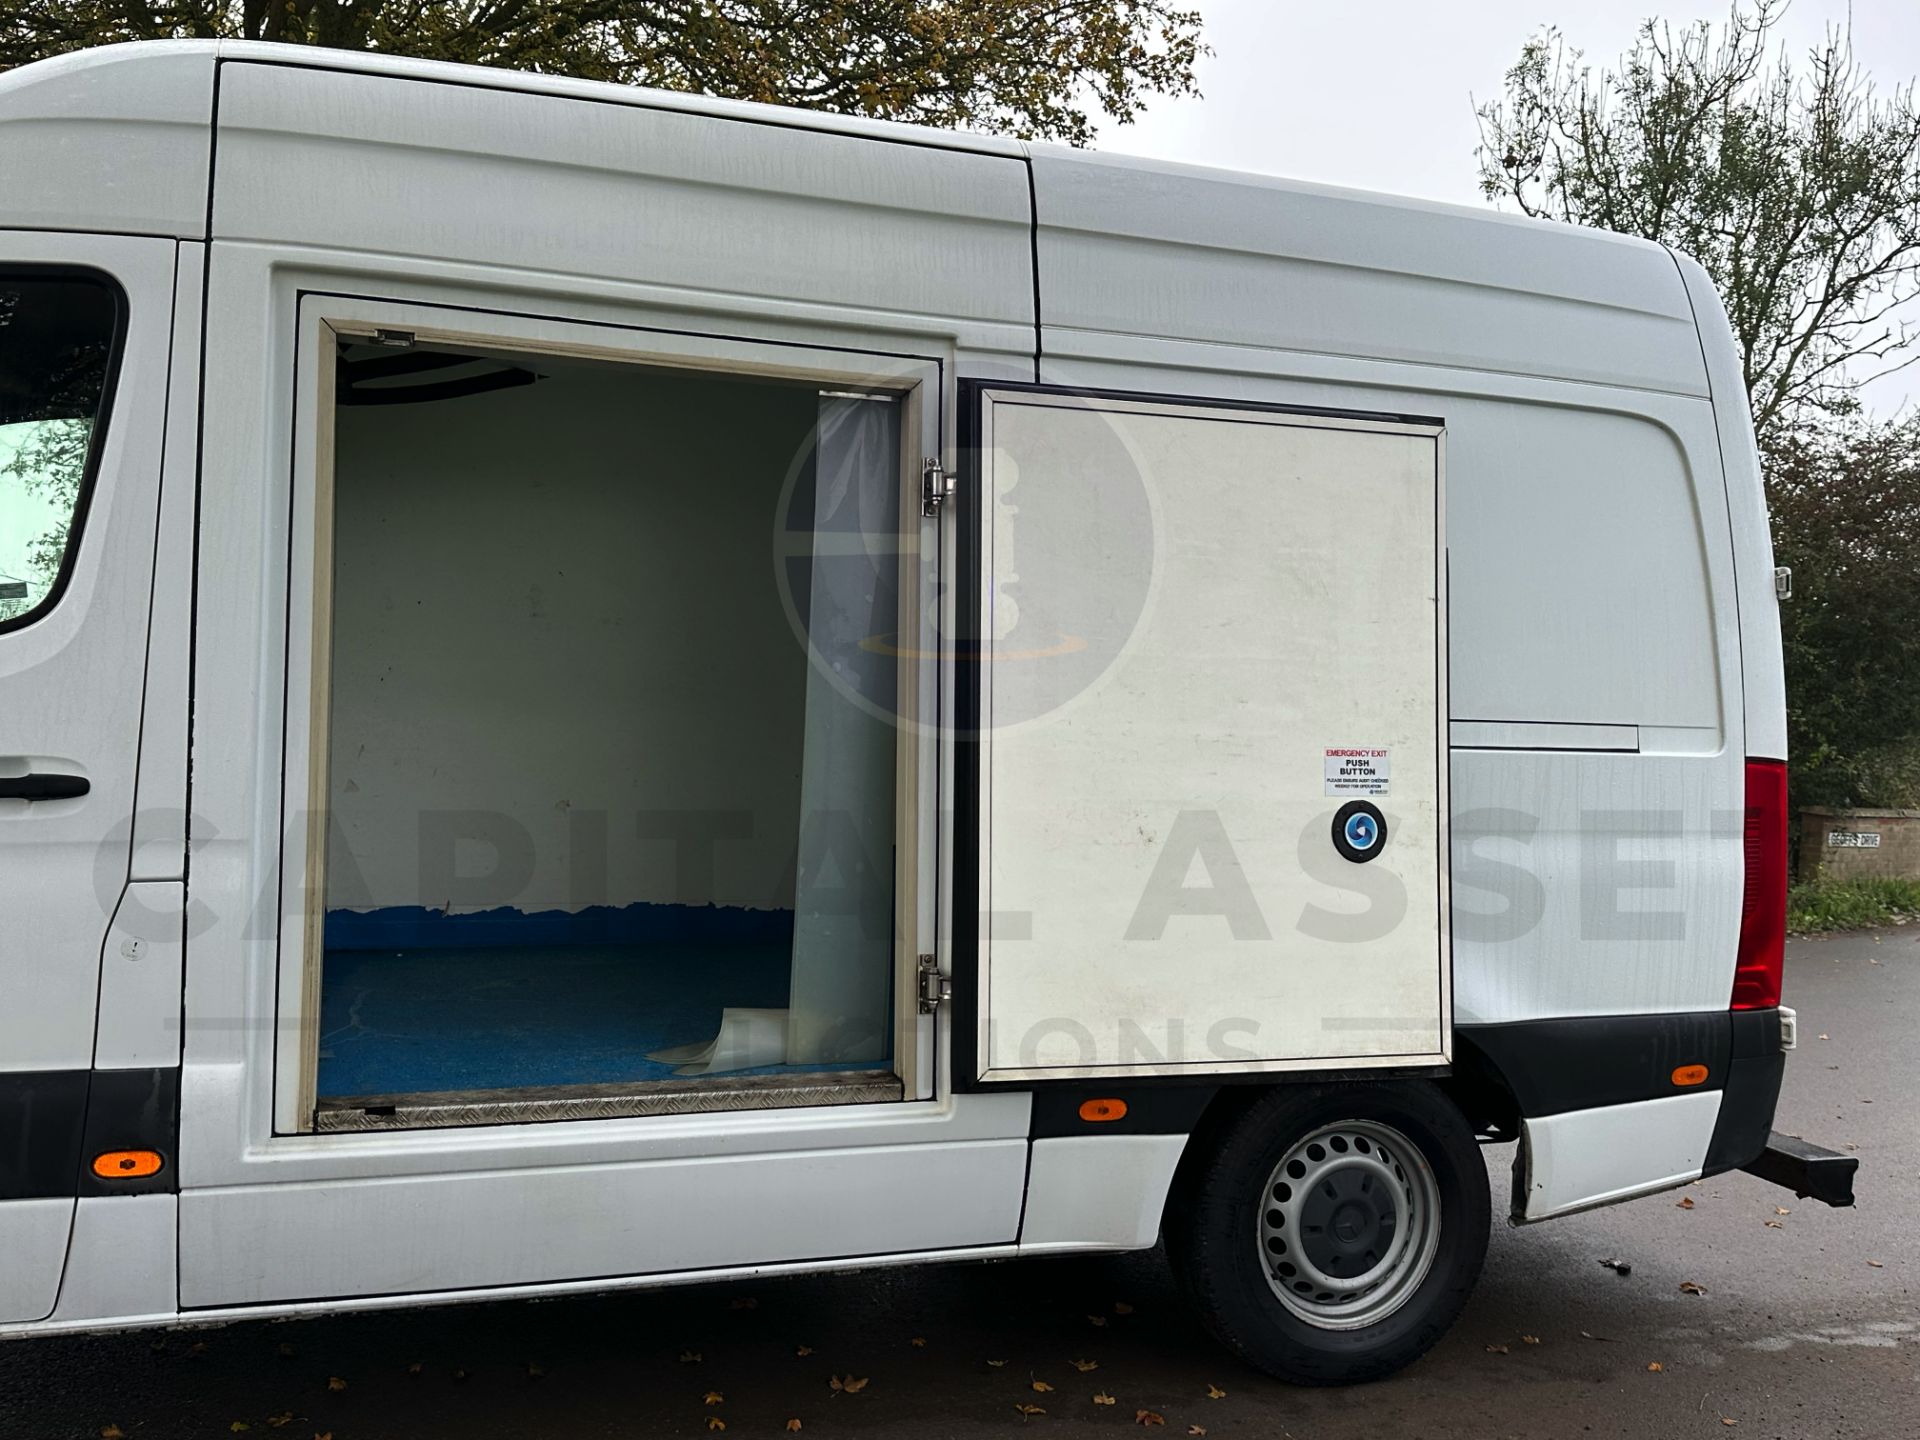 MERCEDES-BENZ SPRINTER 314 CDI *MWB - REFRIGERATED VAN* (2019 - FACELIFT MODEL) *OVERNIGHT STANDBY* - Image 23 of 45